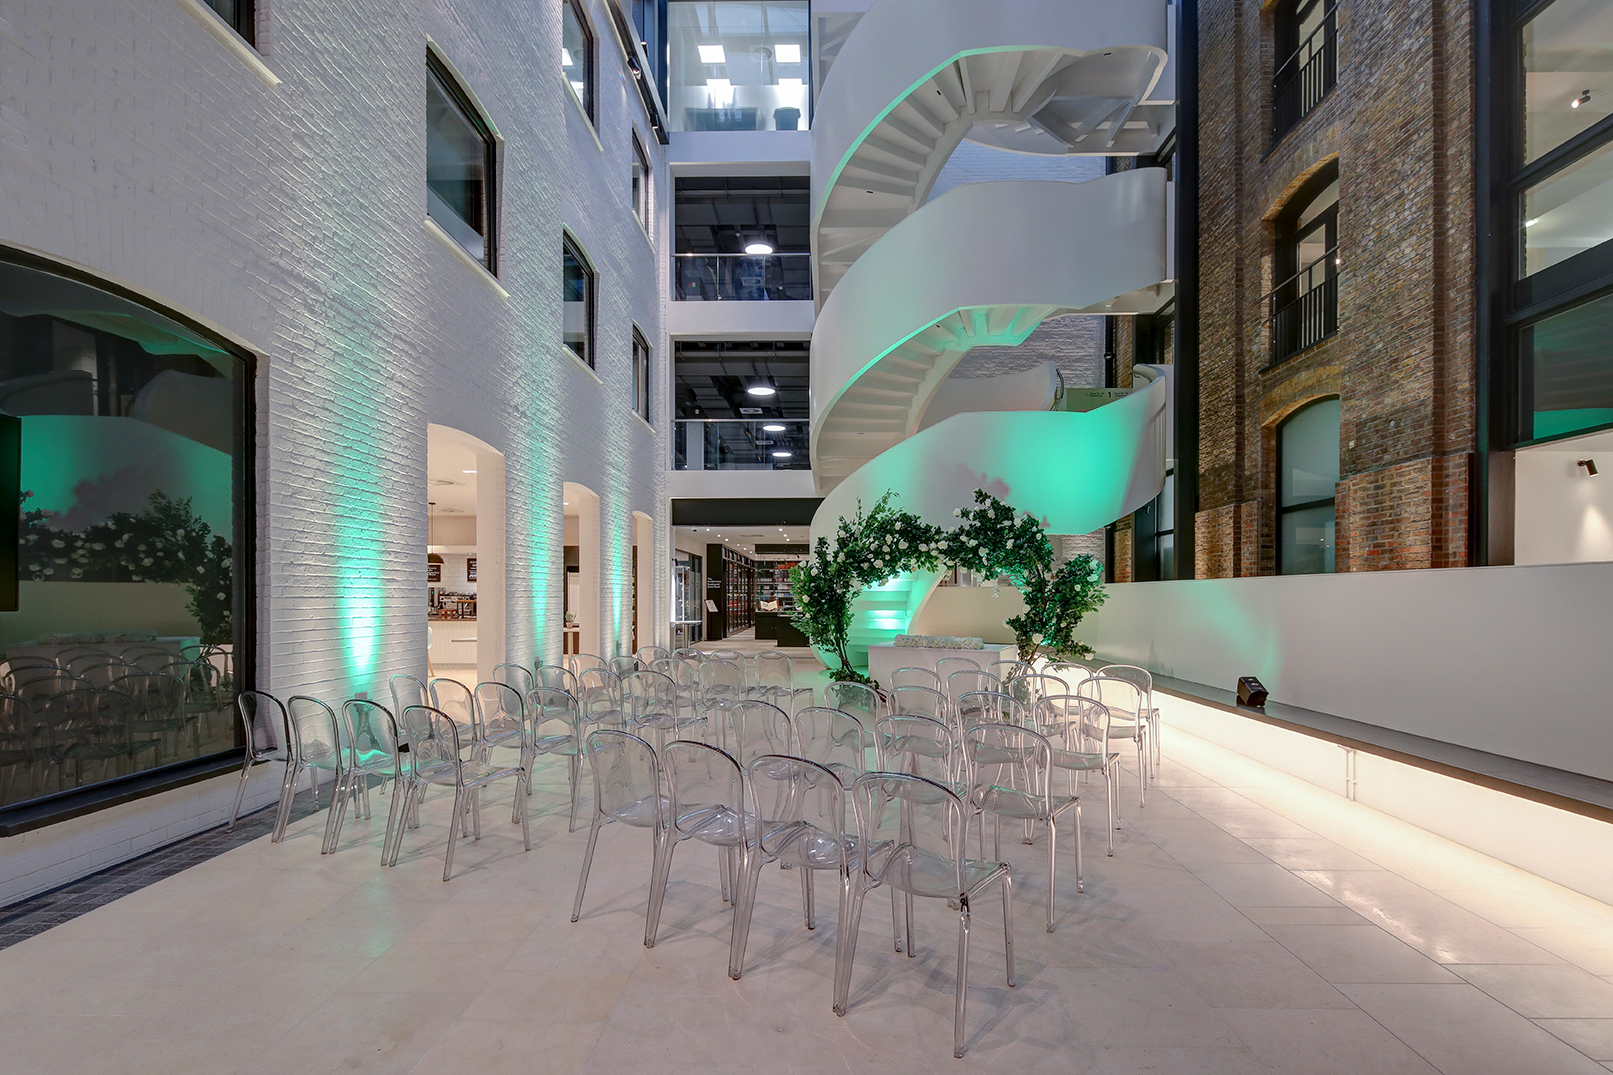 10 Union Street, Conference and Meetings Venue for Hire, London Bridge - Latest Blog Post Image